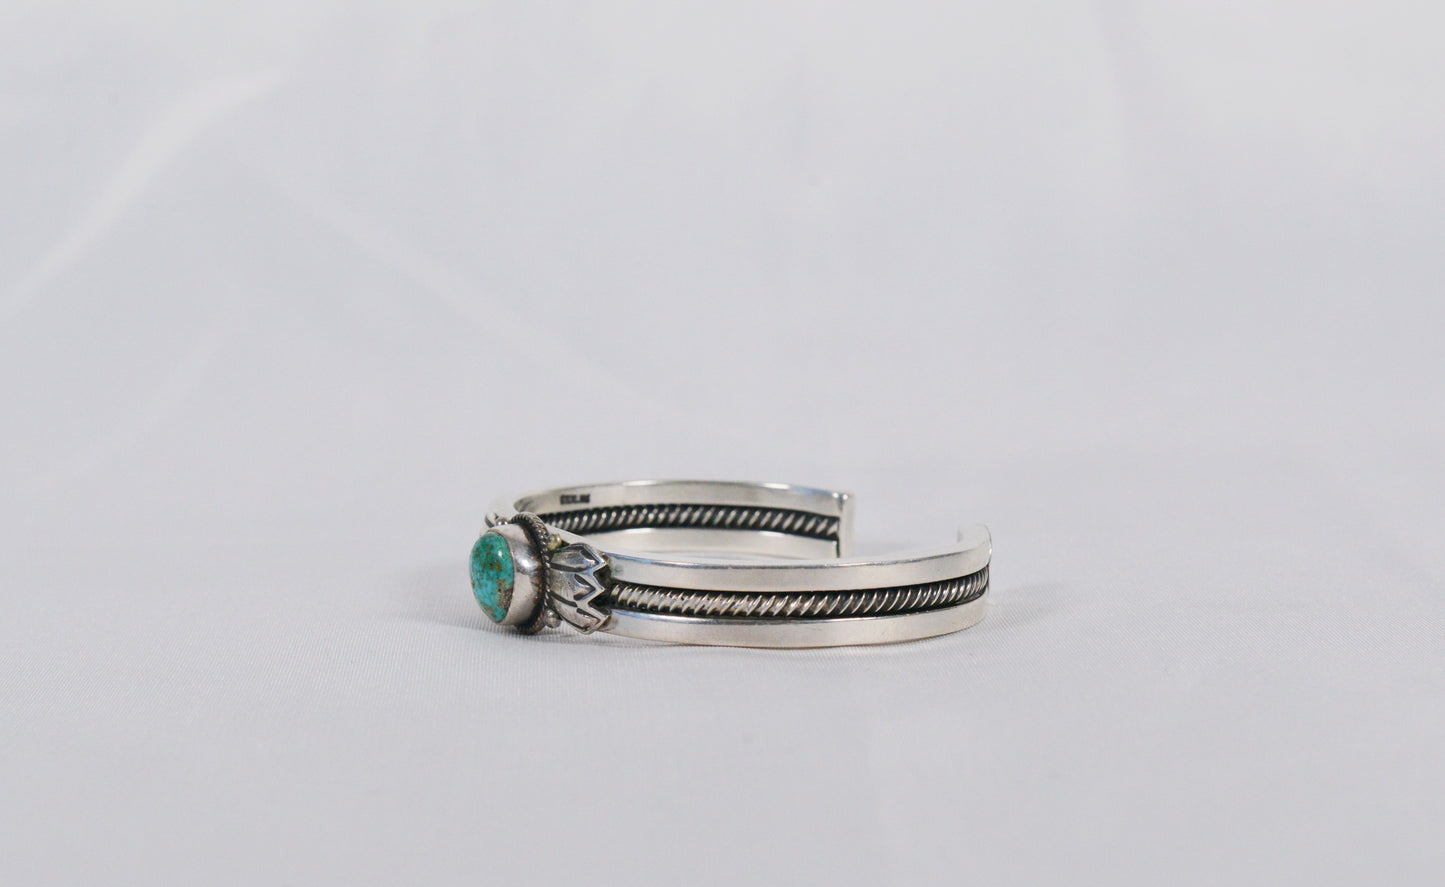 Vintage Sterling Silver Turquoise Cuff Bracelet, 7.5 inches - 50.4g